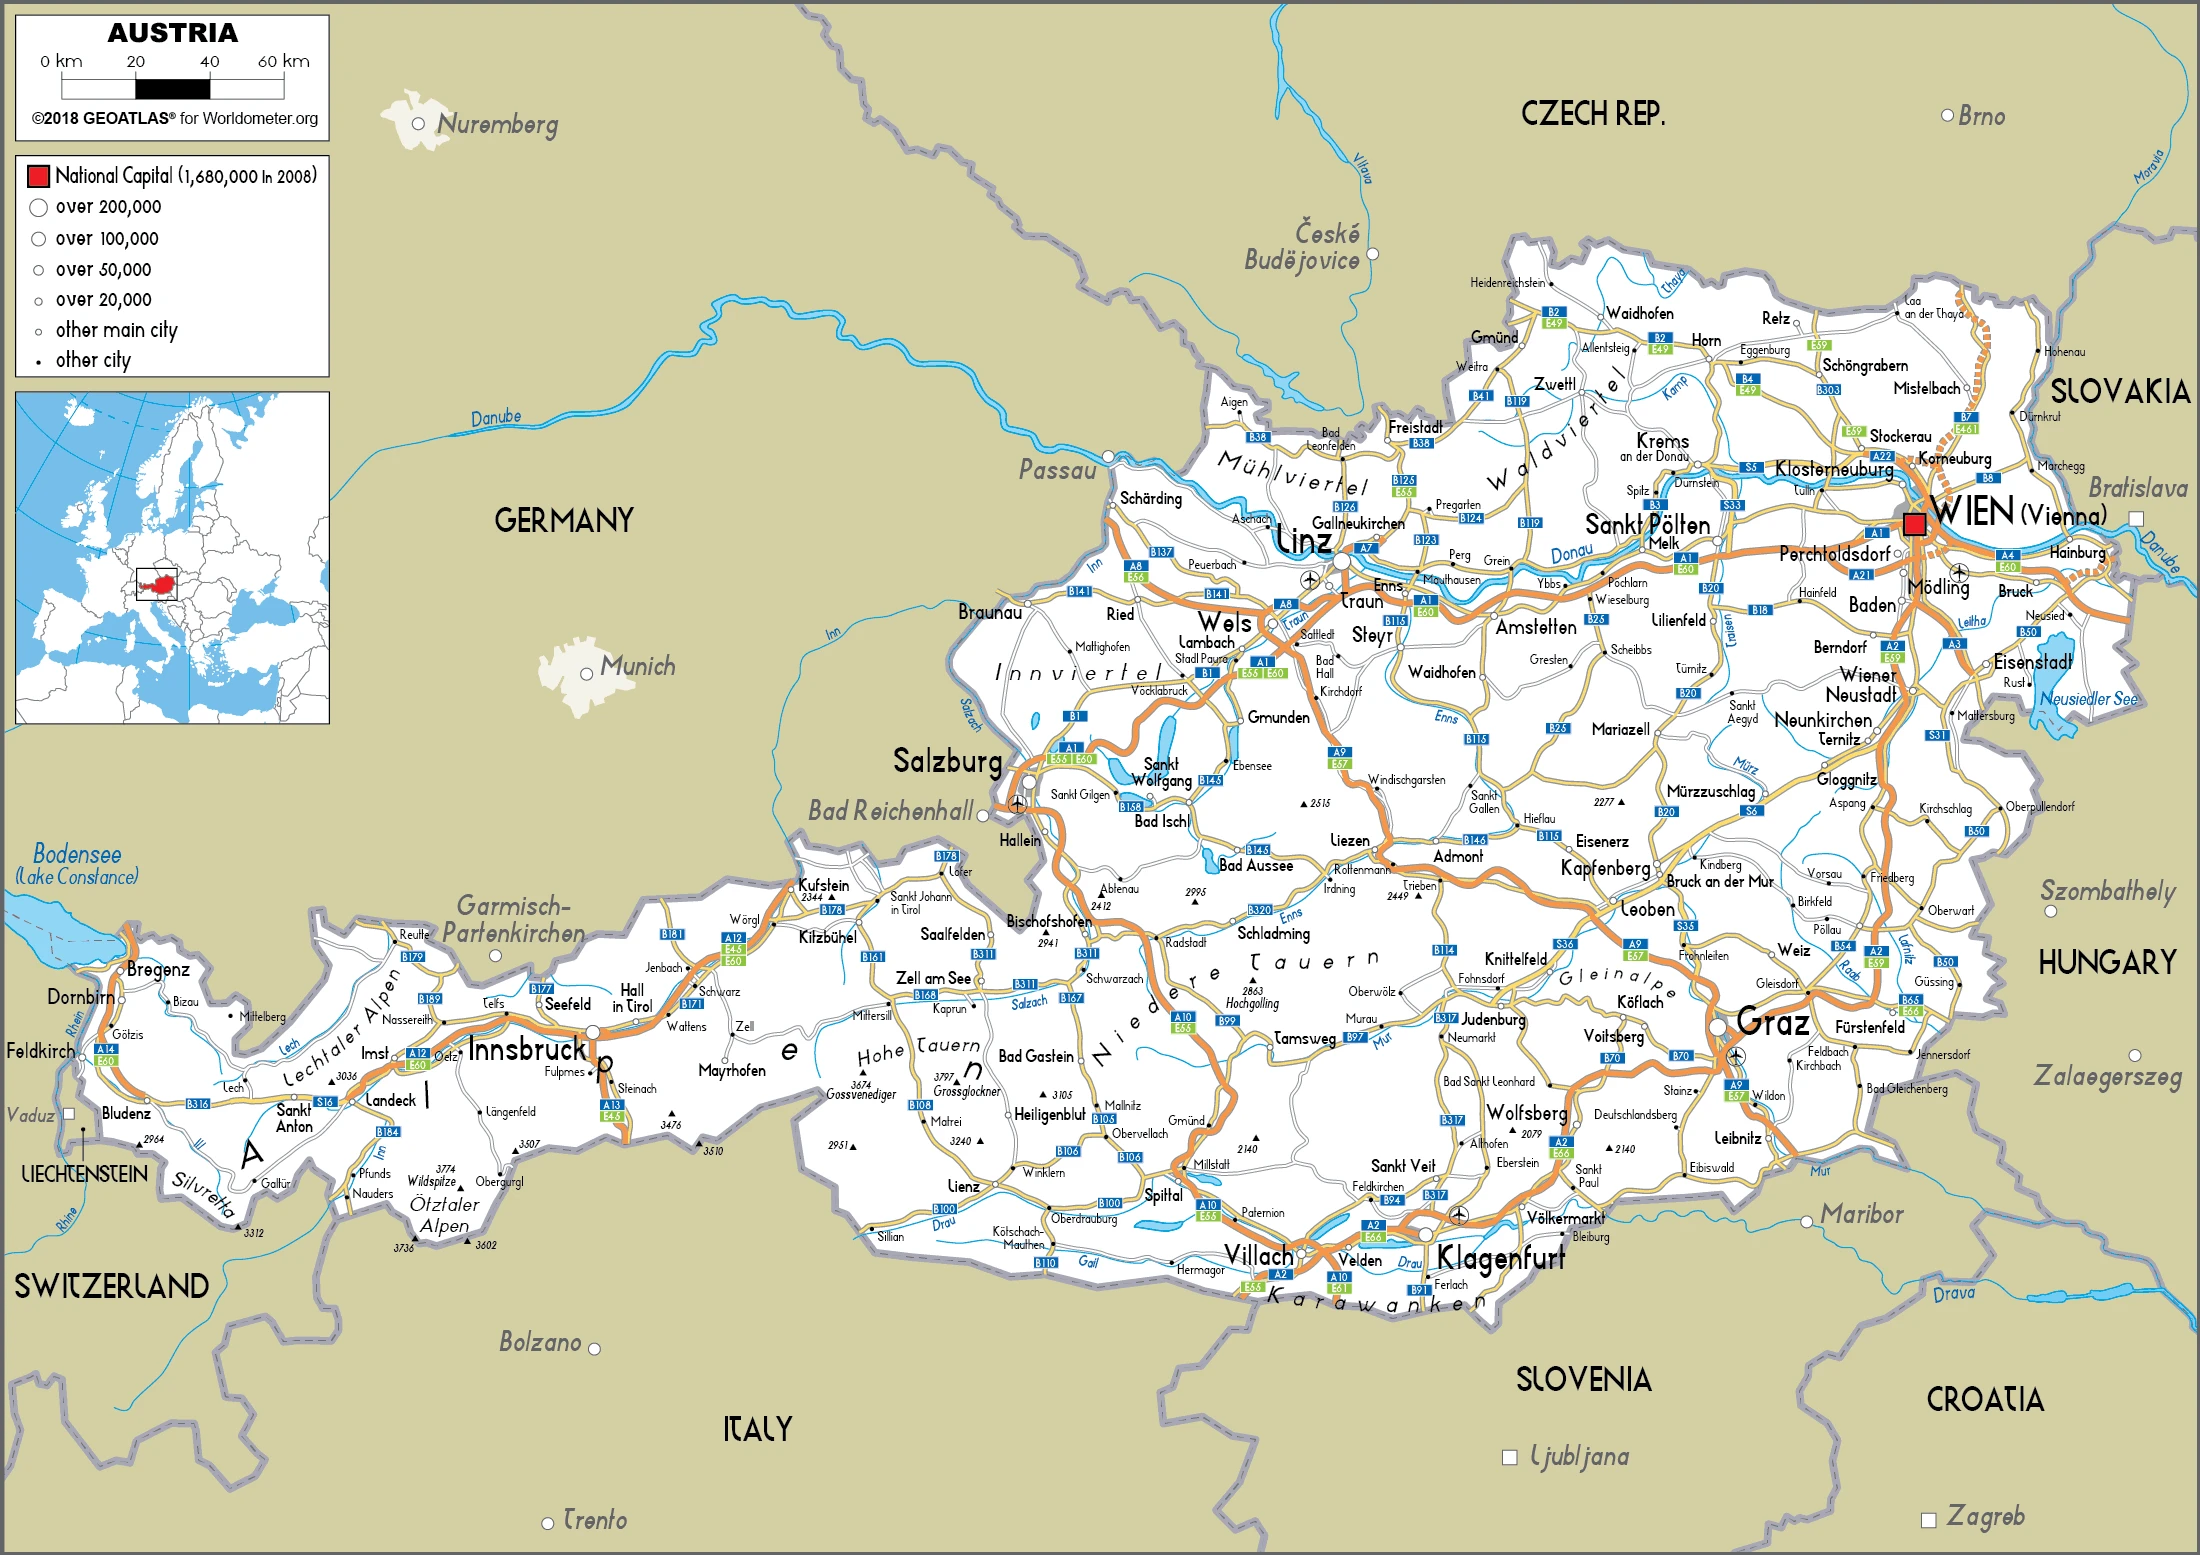 The route plan of the Austrian roadways.